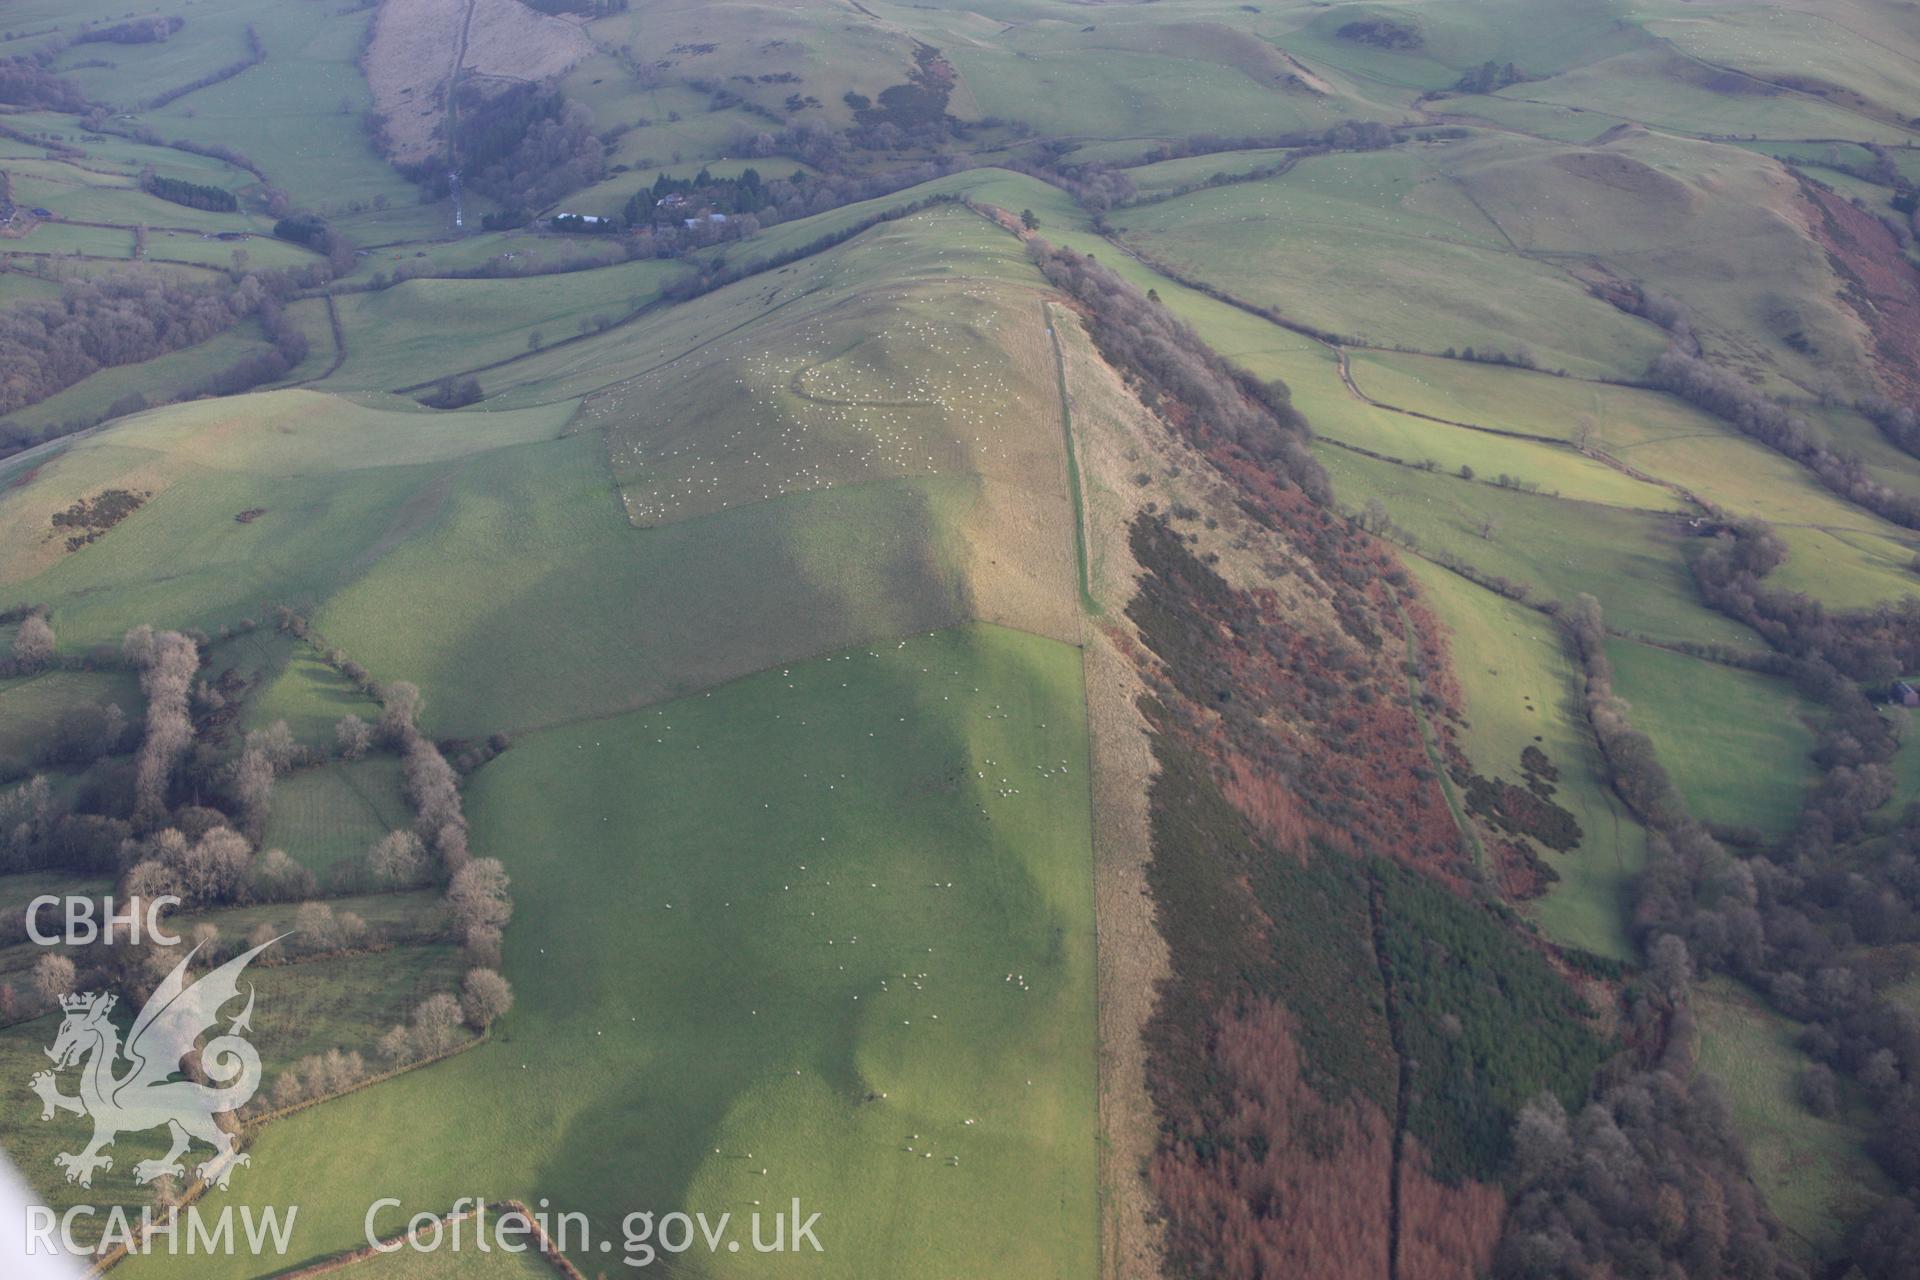 RCAHMW colour oblique aerial photograph of Llyssin Hill Hillfort and Crossdykes. Taken on 10 December 2009 by Toby Driver